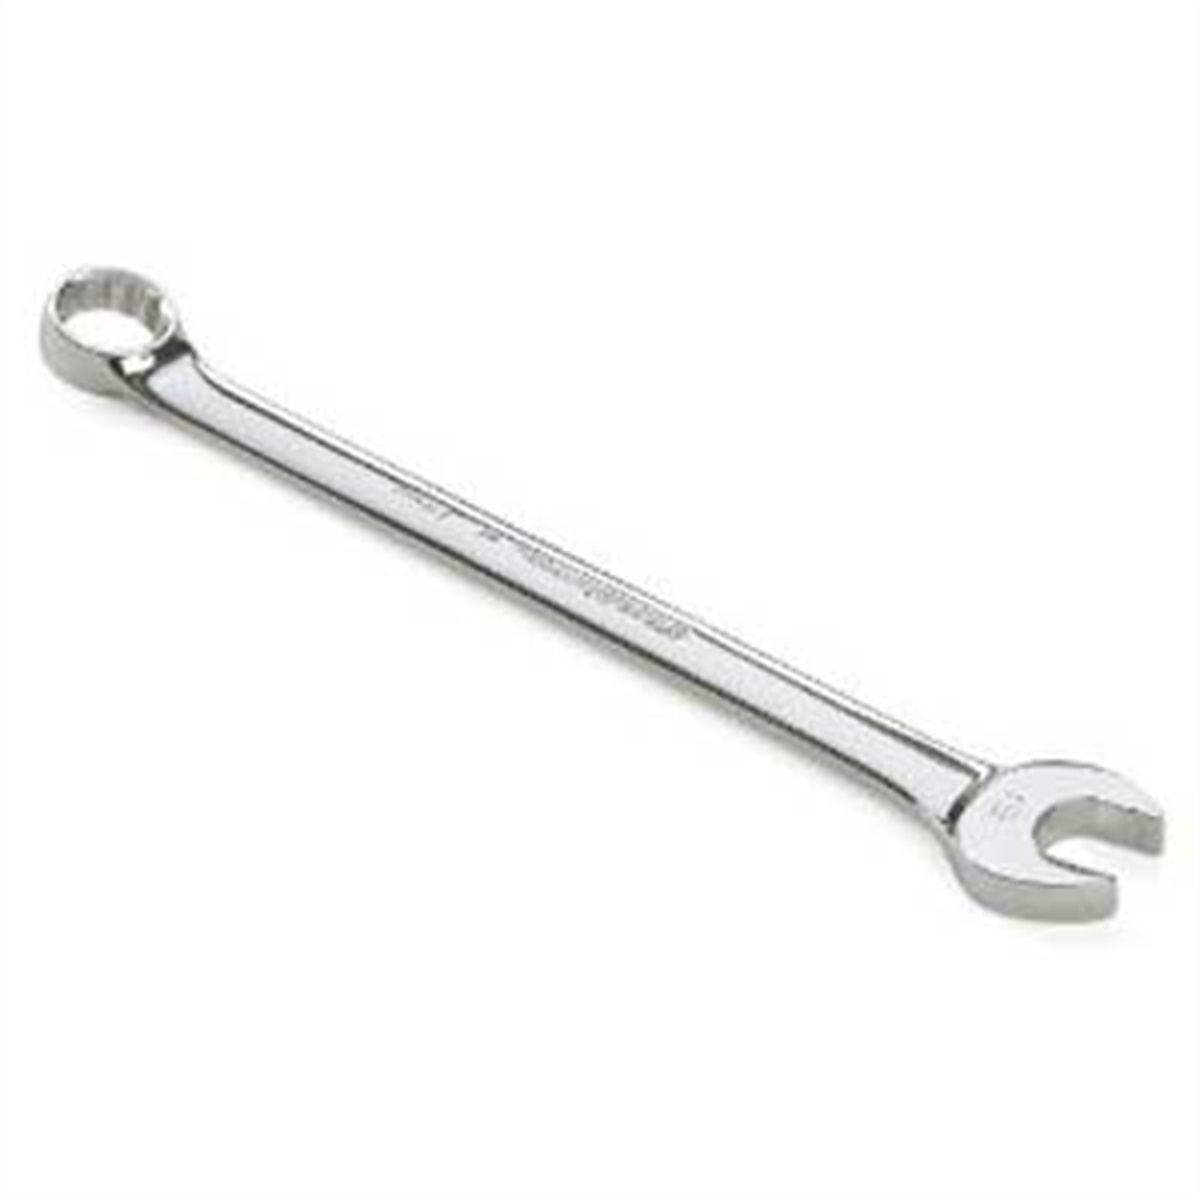 1-1/8" Long Pattern Combination Wrench